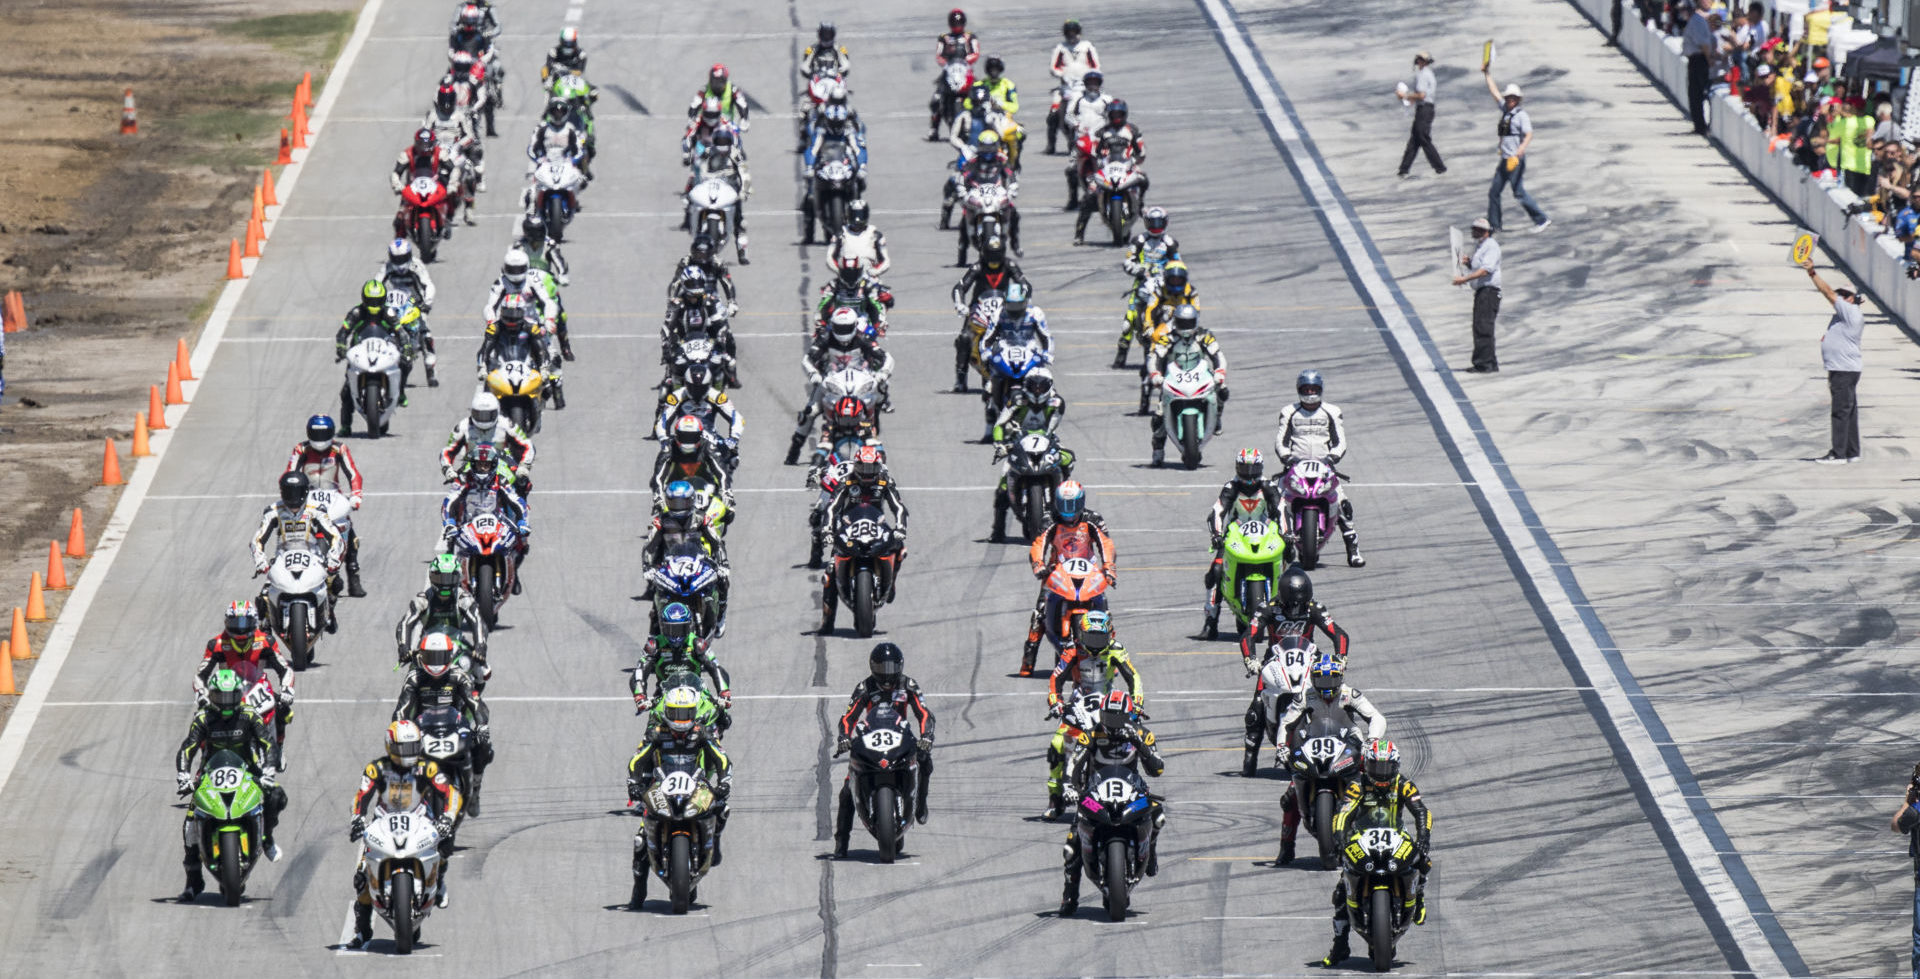 The starting grid of the Daytona 200 in 2017. Photo by Brian J. Nelson.